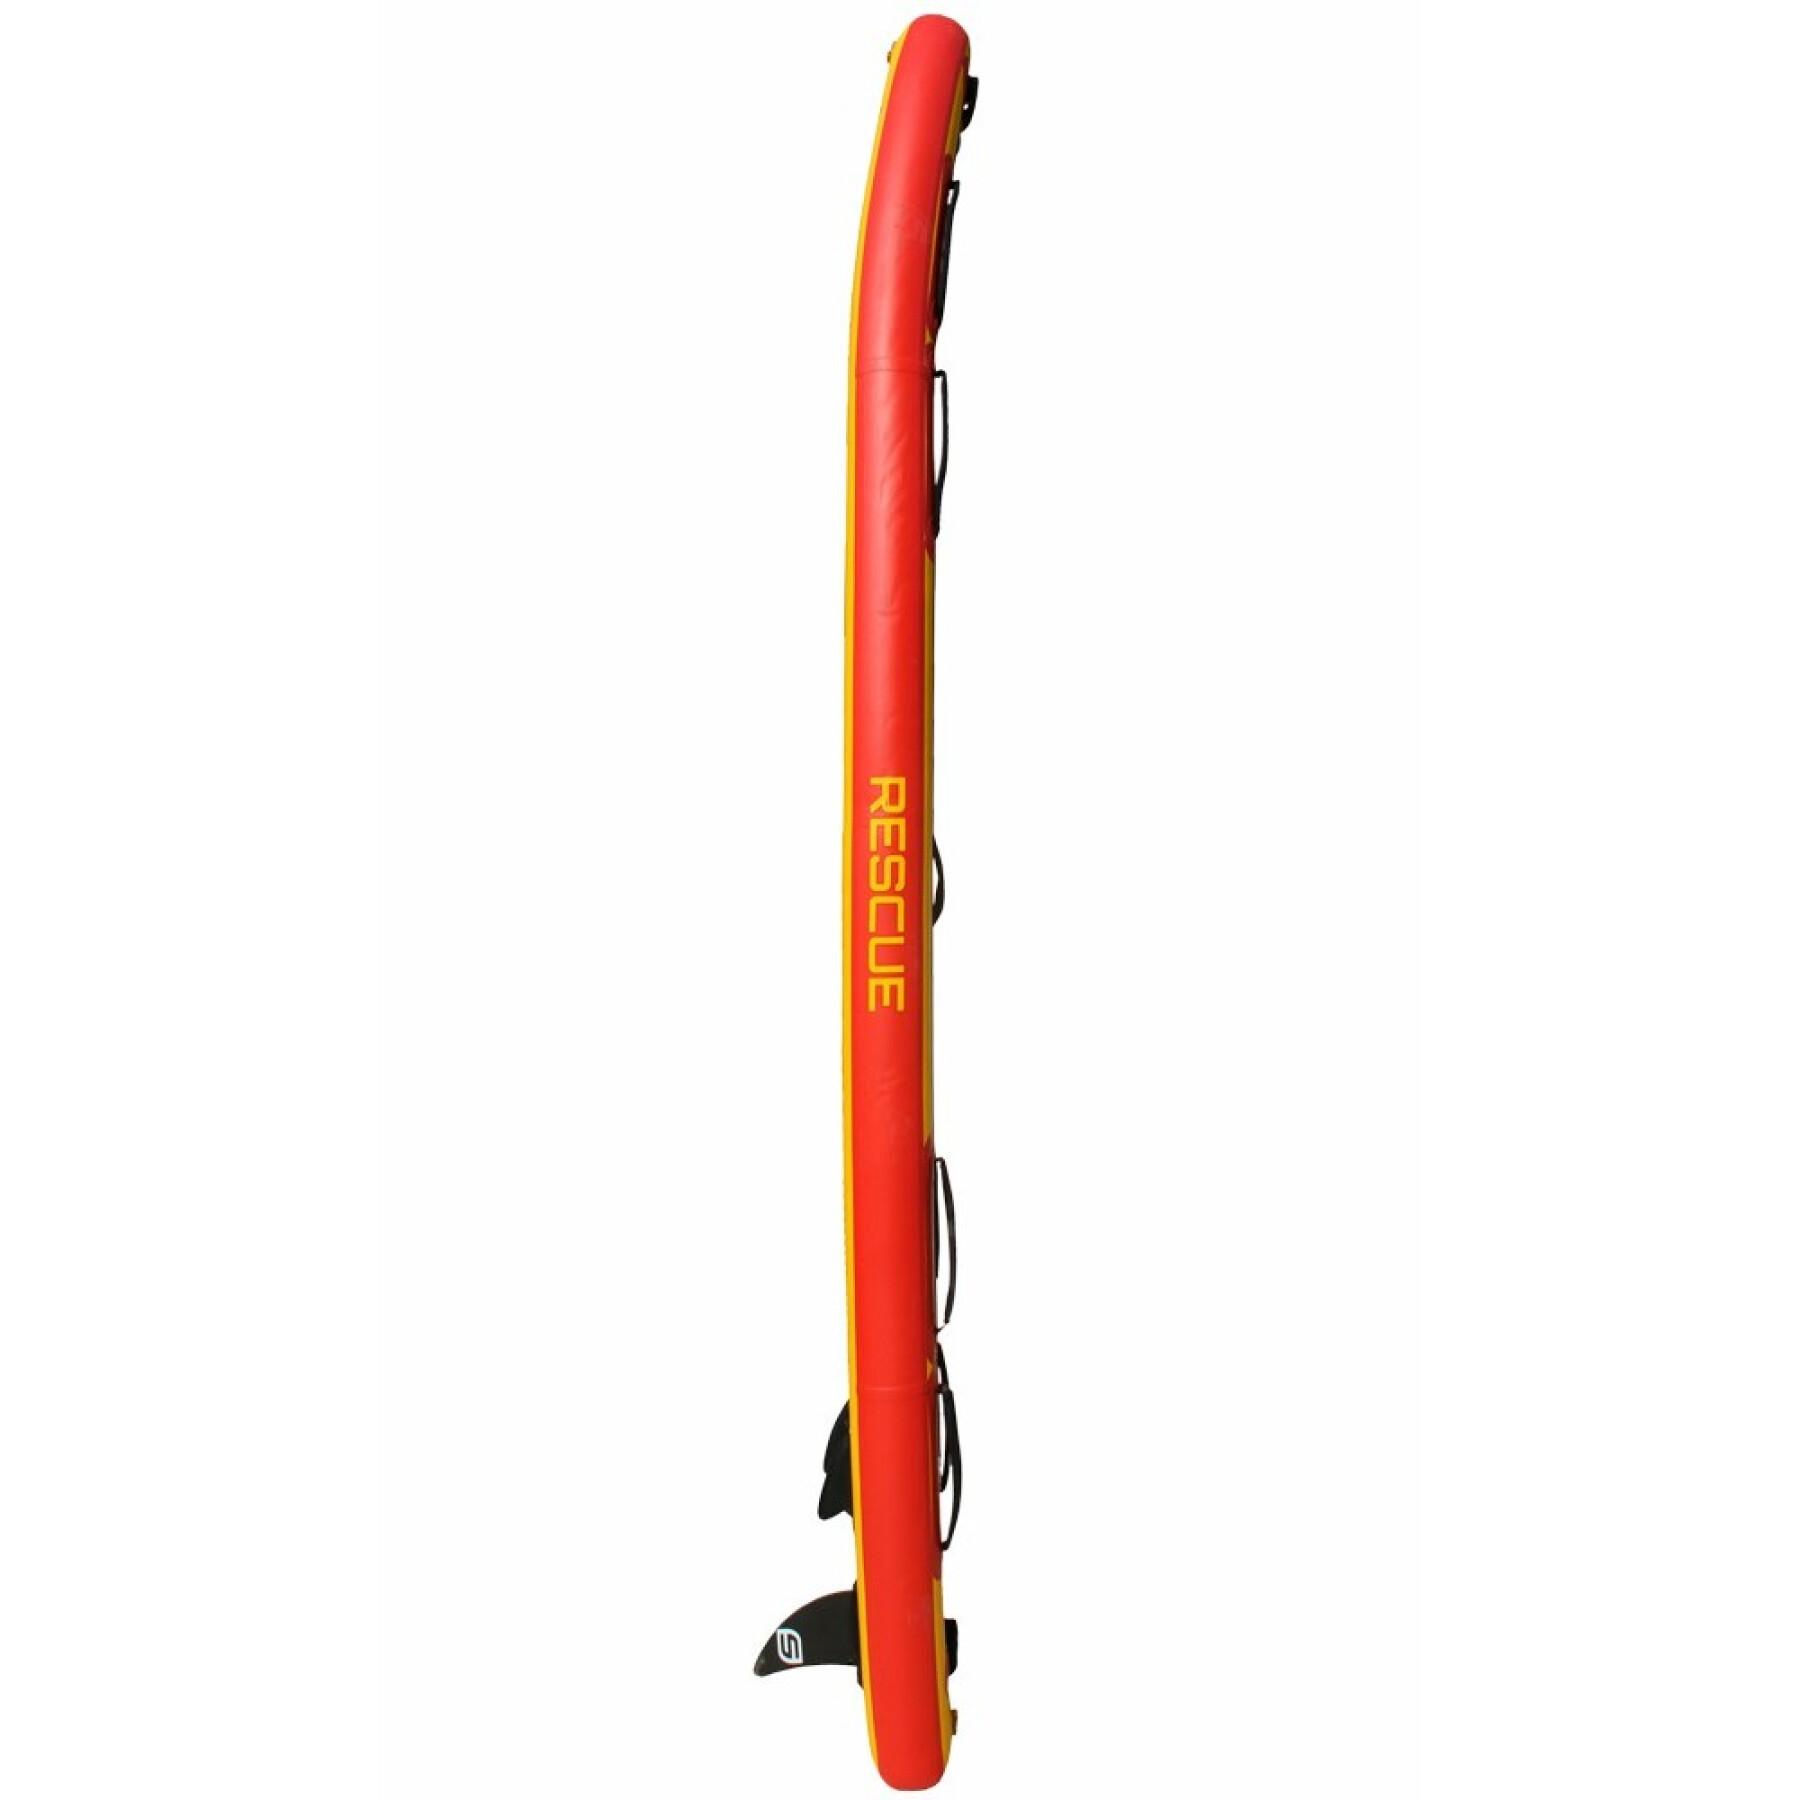 Stand up Inflatable paddle Safe Waterman Patrol Rescue - 11